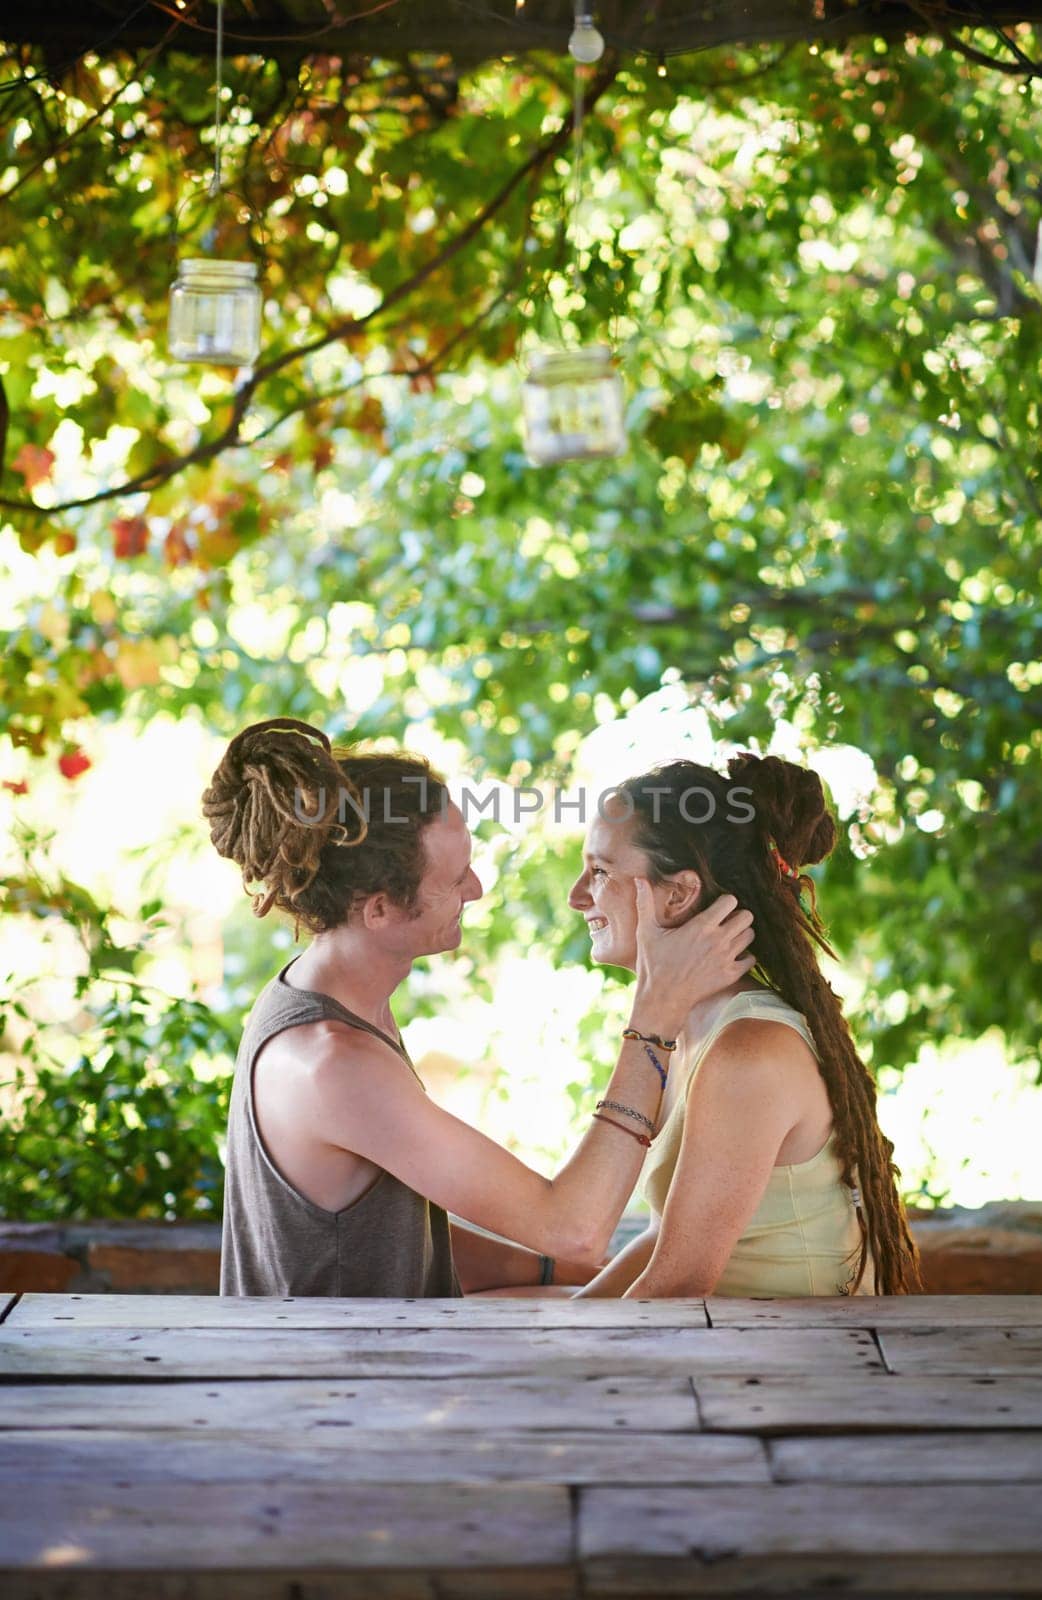 Outdoor, date and sunshine with couple, love and bonding together with romance and happiness. Park, smile or man with woman or cheerful with joy or relationship with marriage or fresh air with nature by YuriArcurs